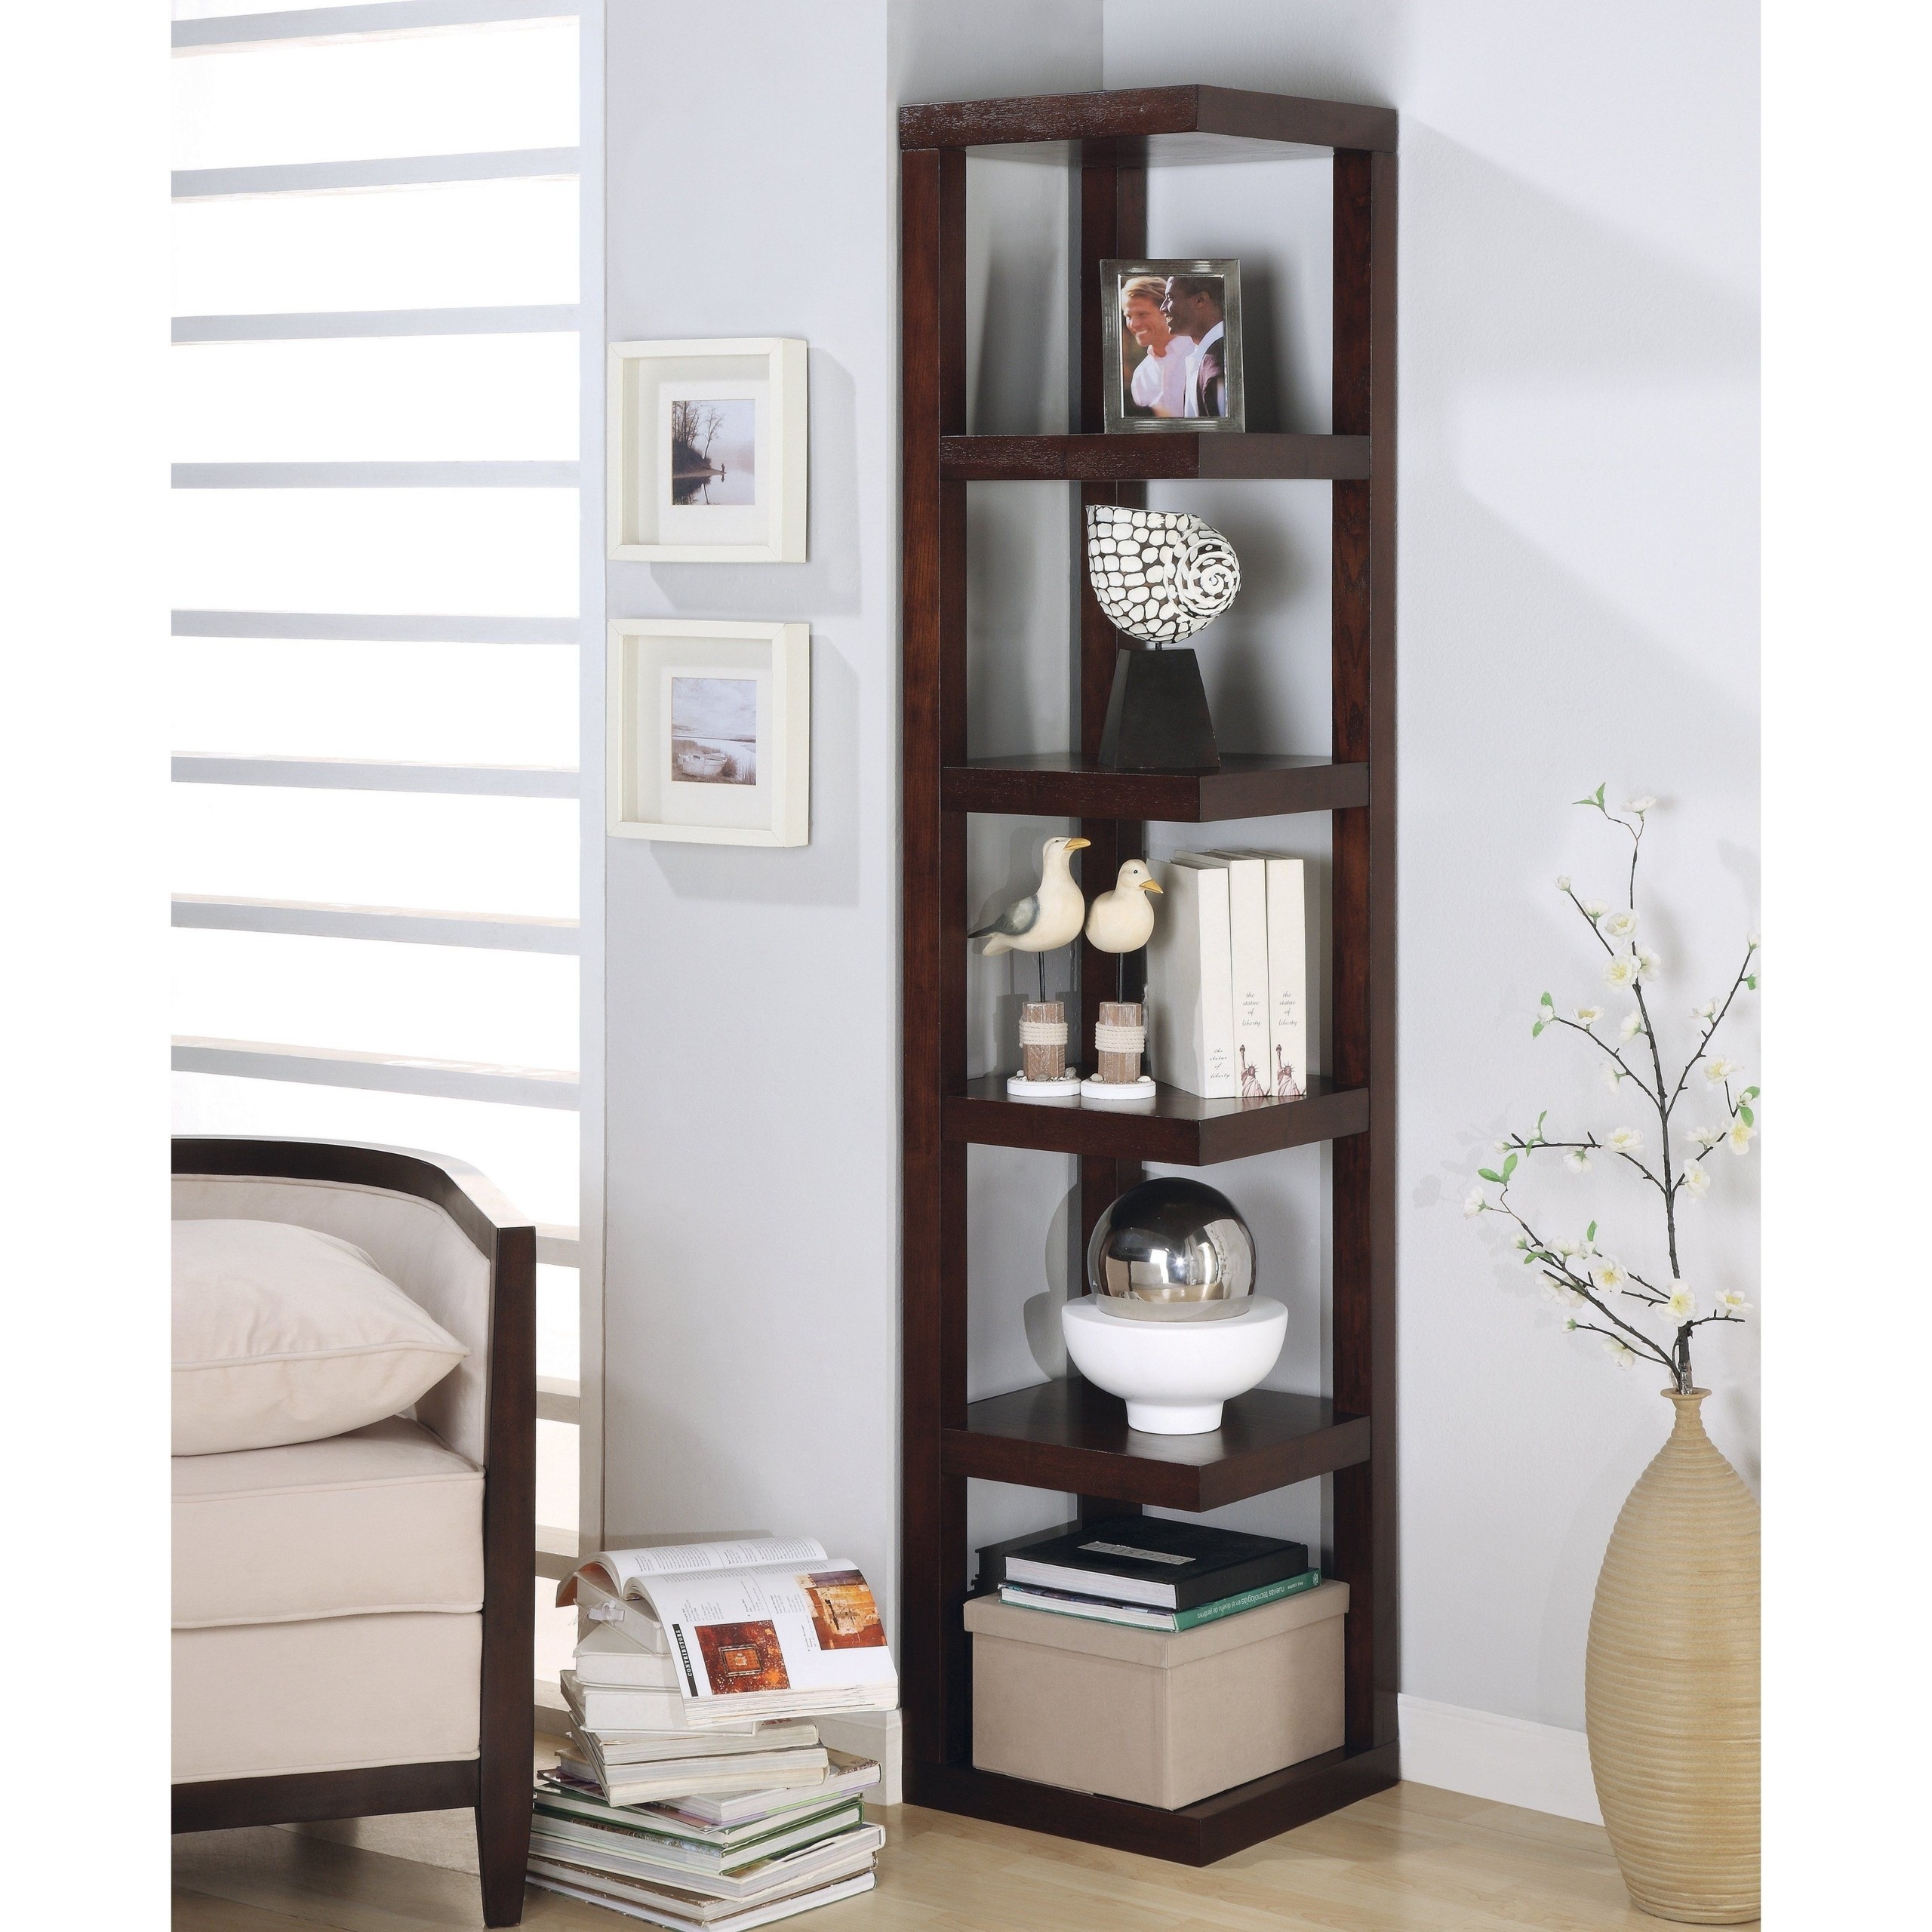 Shop for narrow corner bookcases and shelf units at amazon